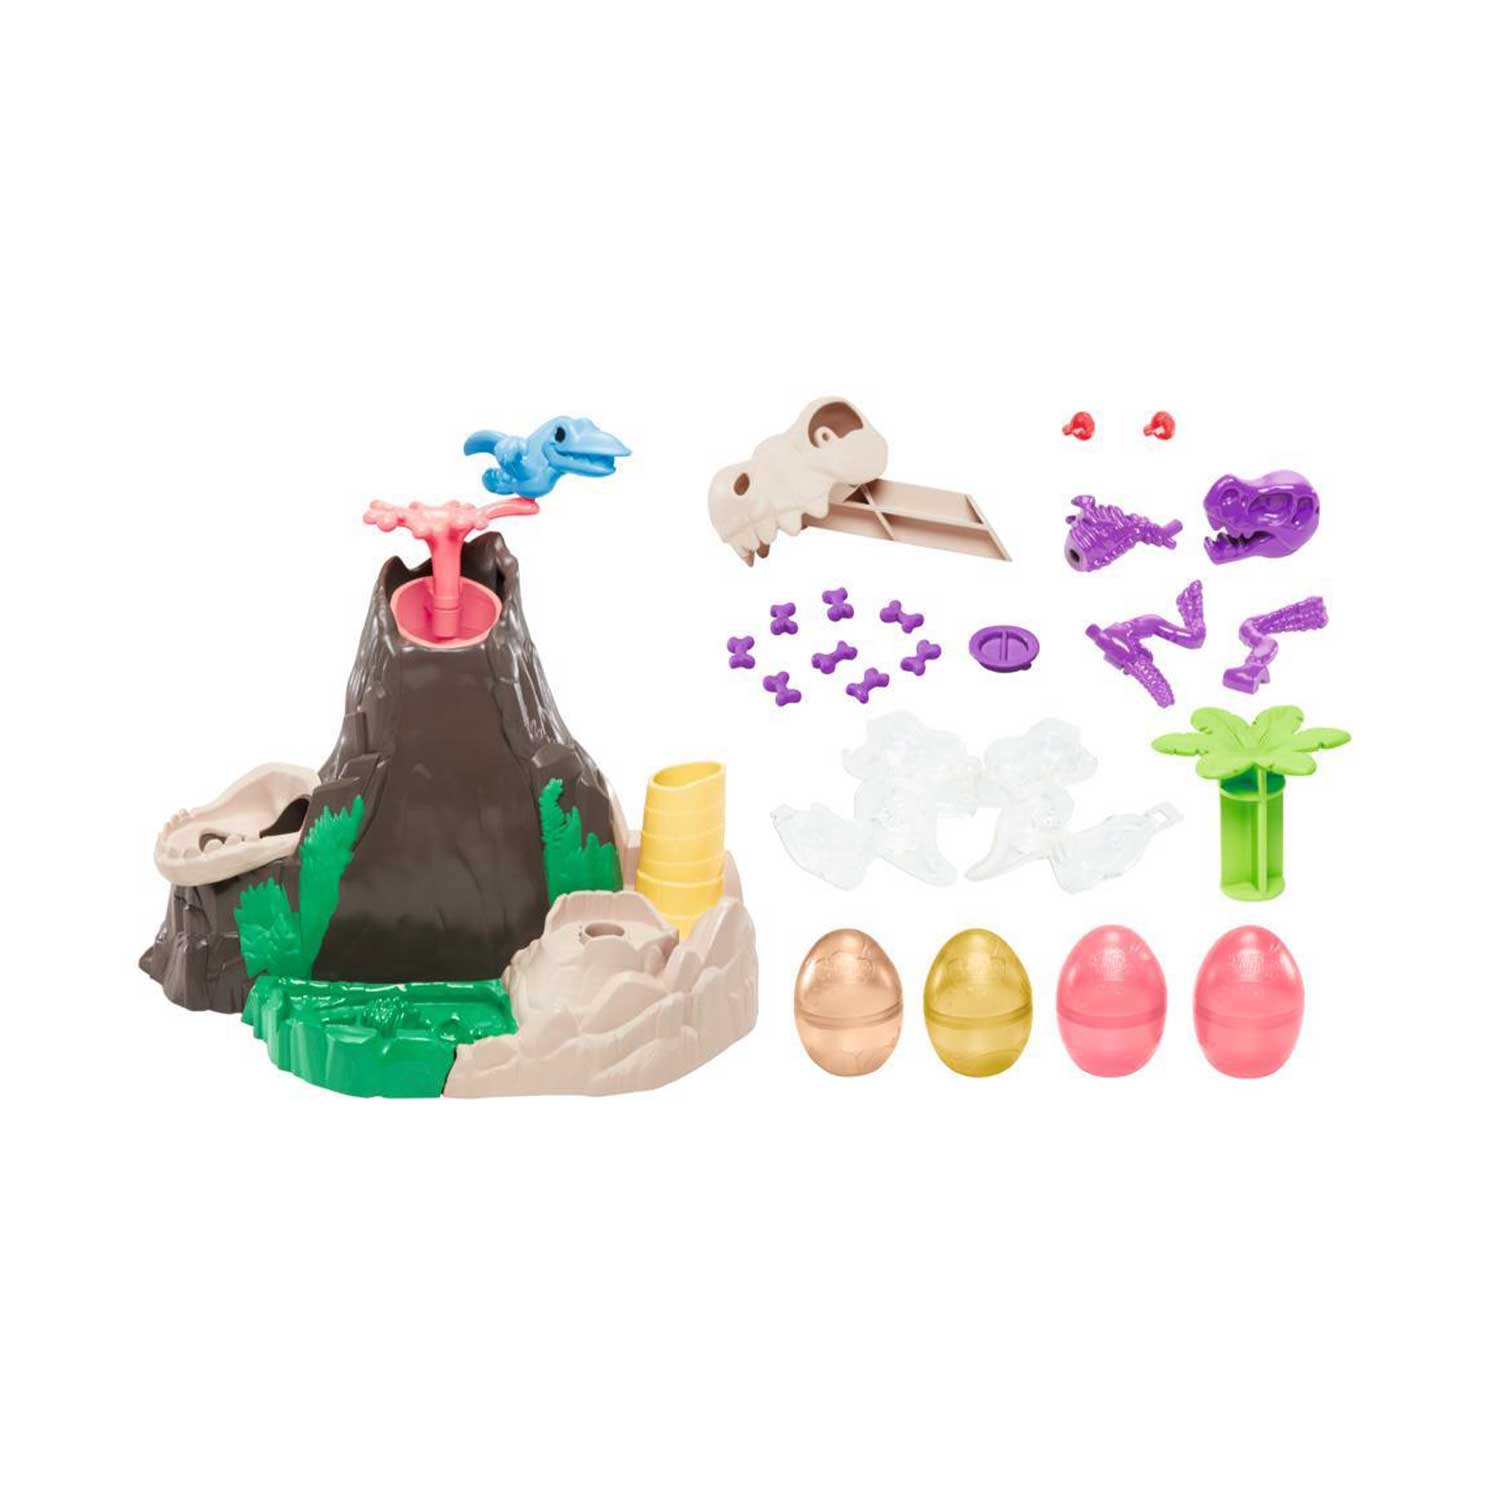 Play-Doh Slime Dino Crew Lava Bones Island Volcano Playset for Kids 4 Years and Up, Non-Toxic - Mod: HSBF1500RC0